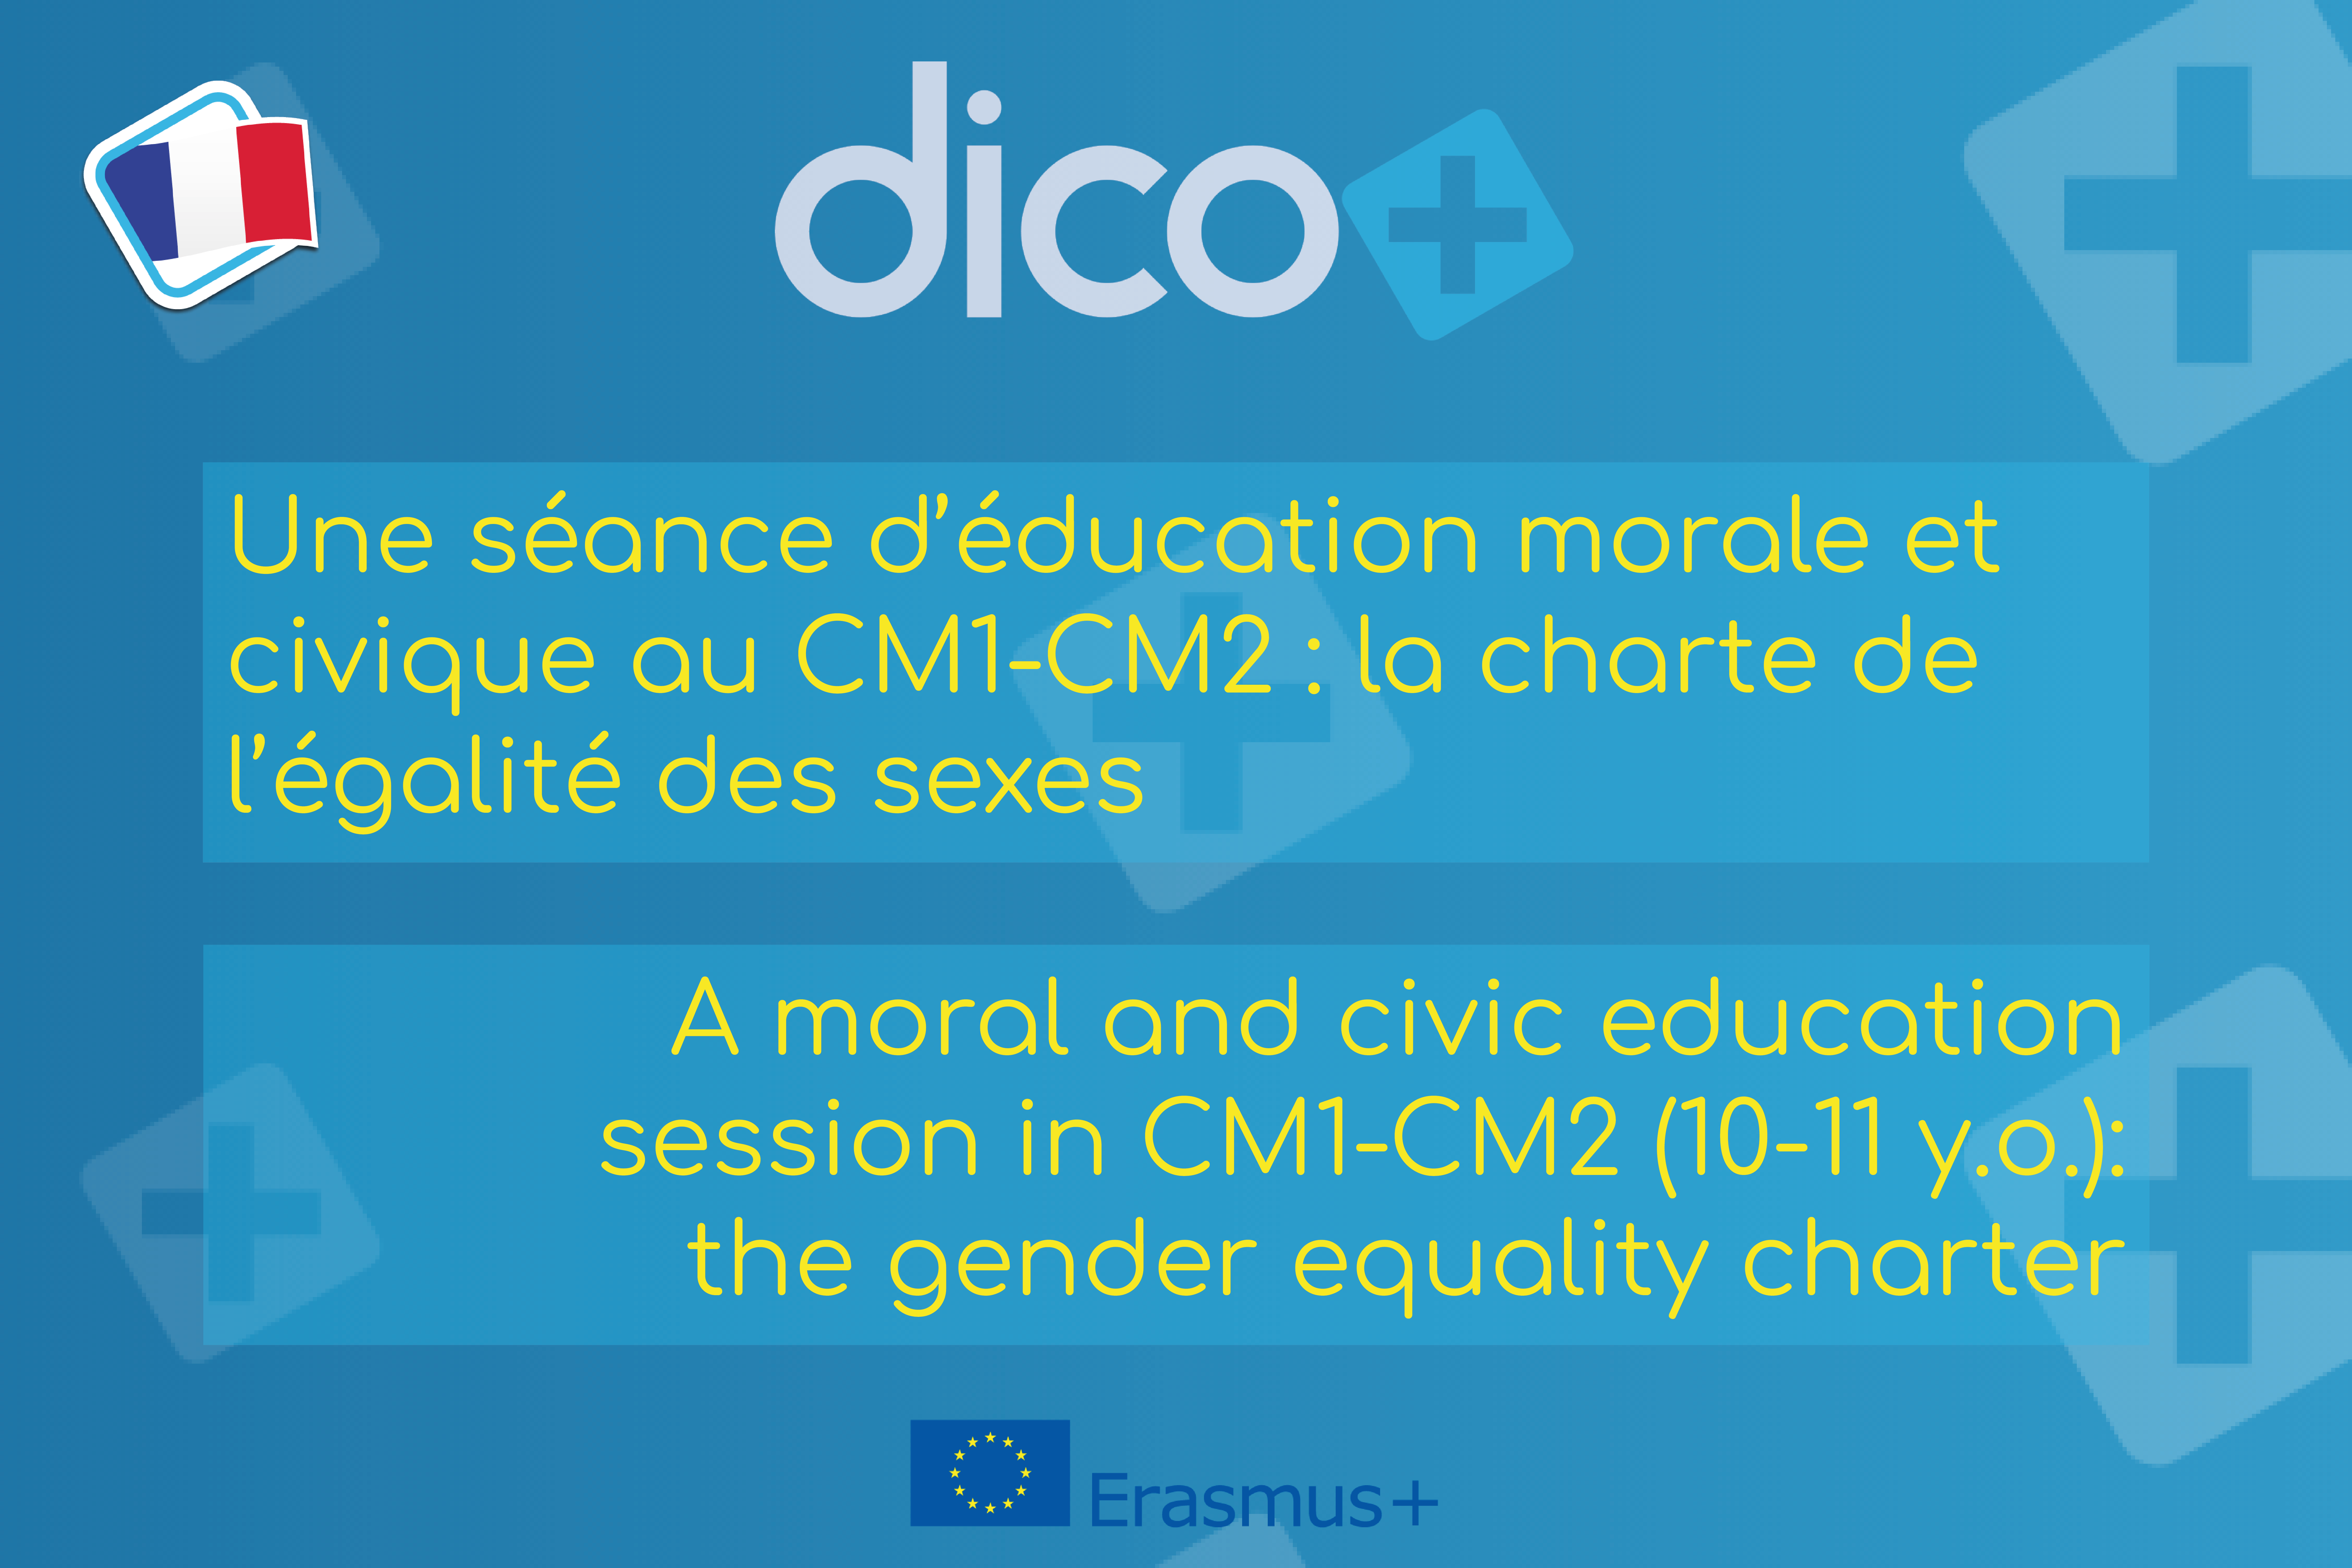 A moral and civic education session with 9 and 10 years old pupils: the Gender Equality Charter